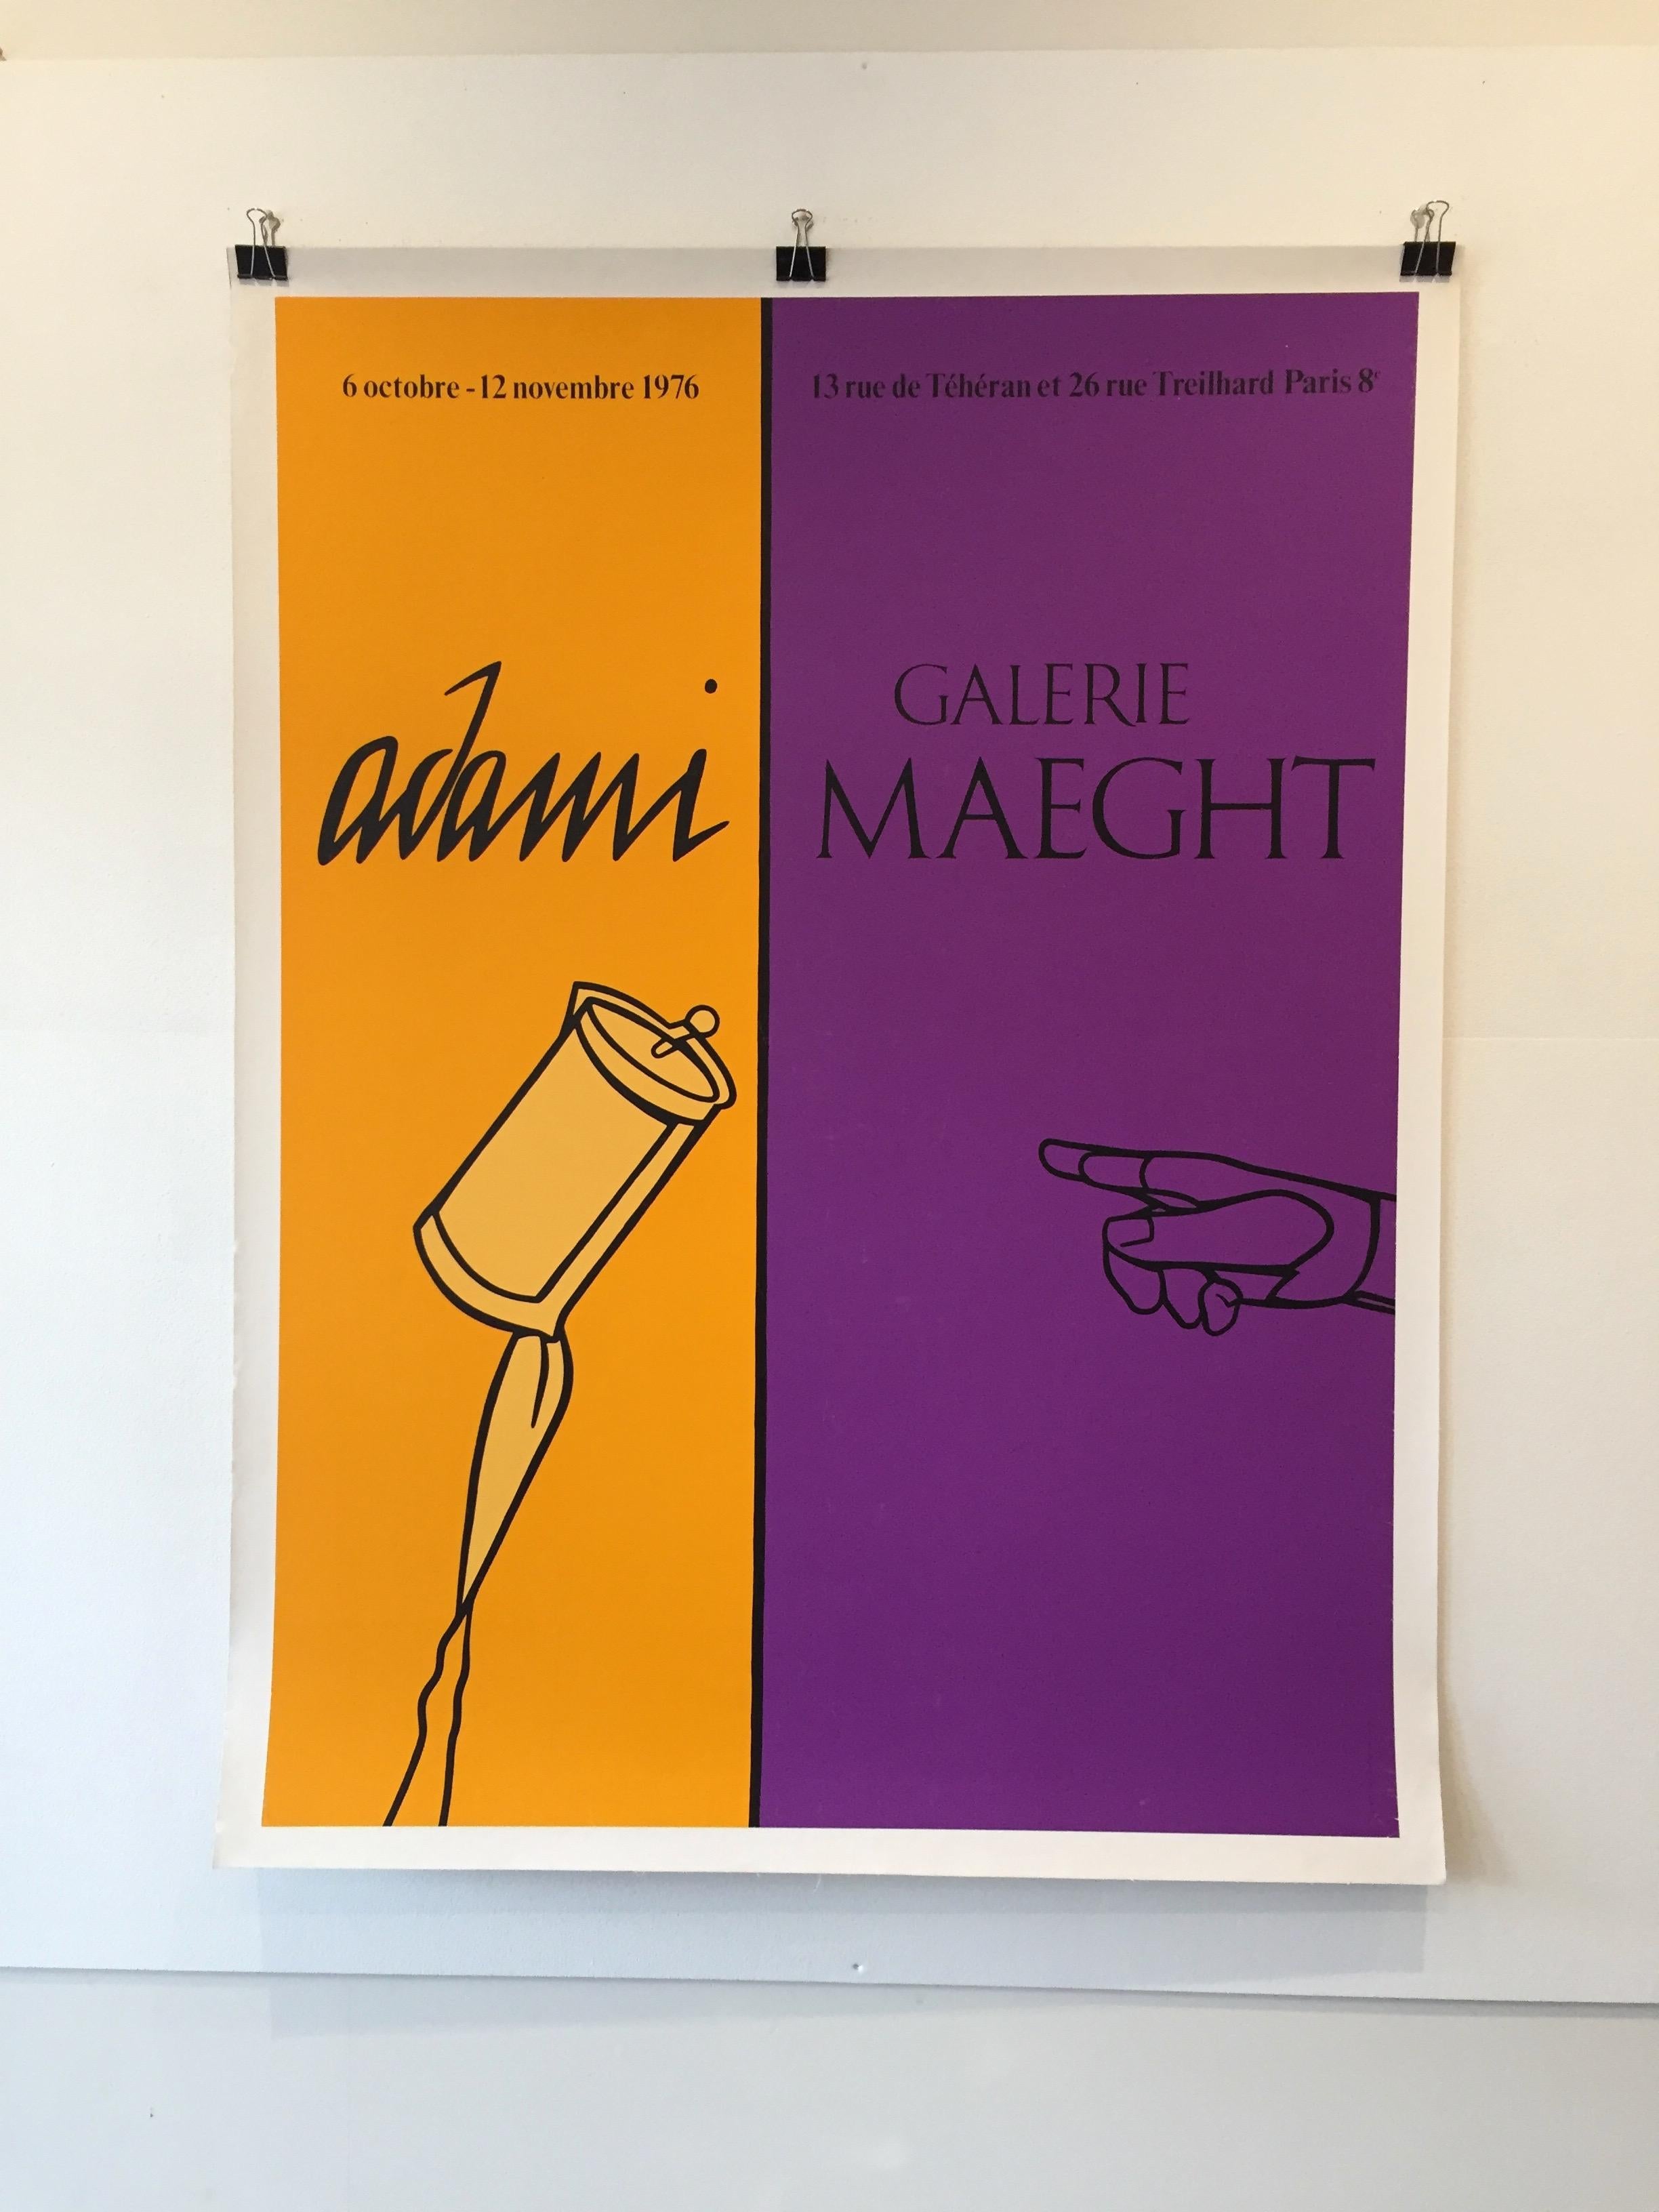 Pop Art exhibition poster, 'Adami' 1976, Galerie Maeght

Original vintage poster promoting the work of the famous Spanish pop artist, Adami from 1976.


Artist: 
V Adami

Year: 
1976

Dimensions: 
166 x 126cm

Condition: